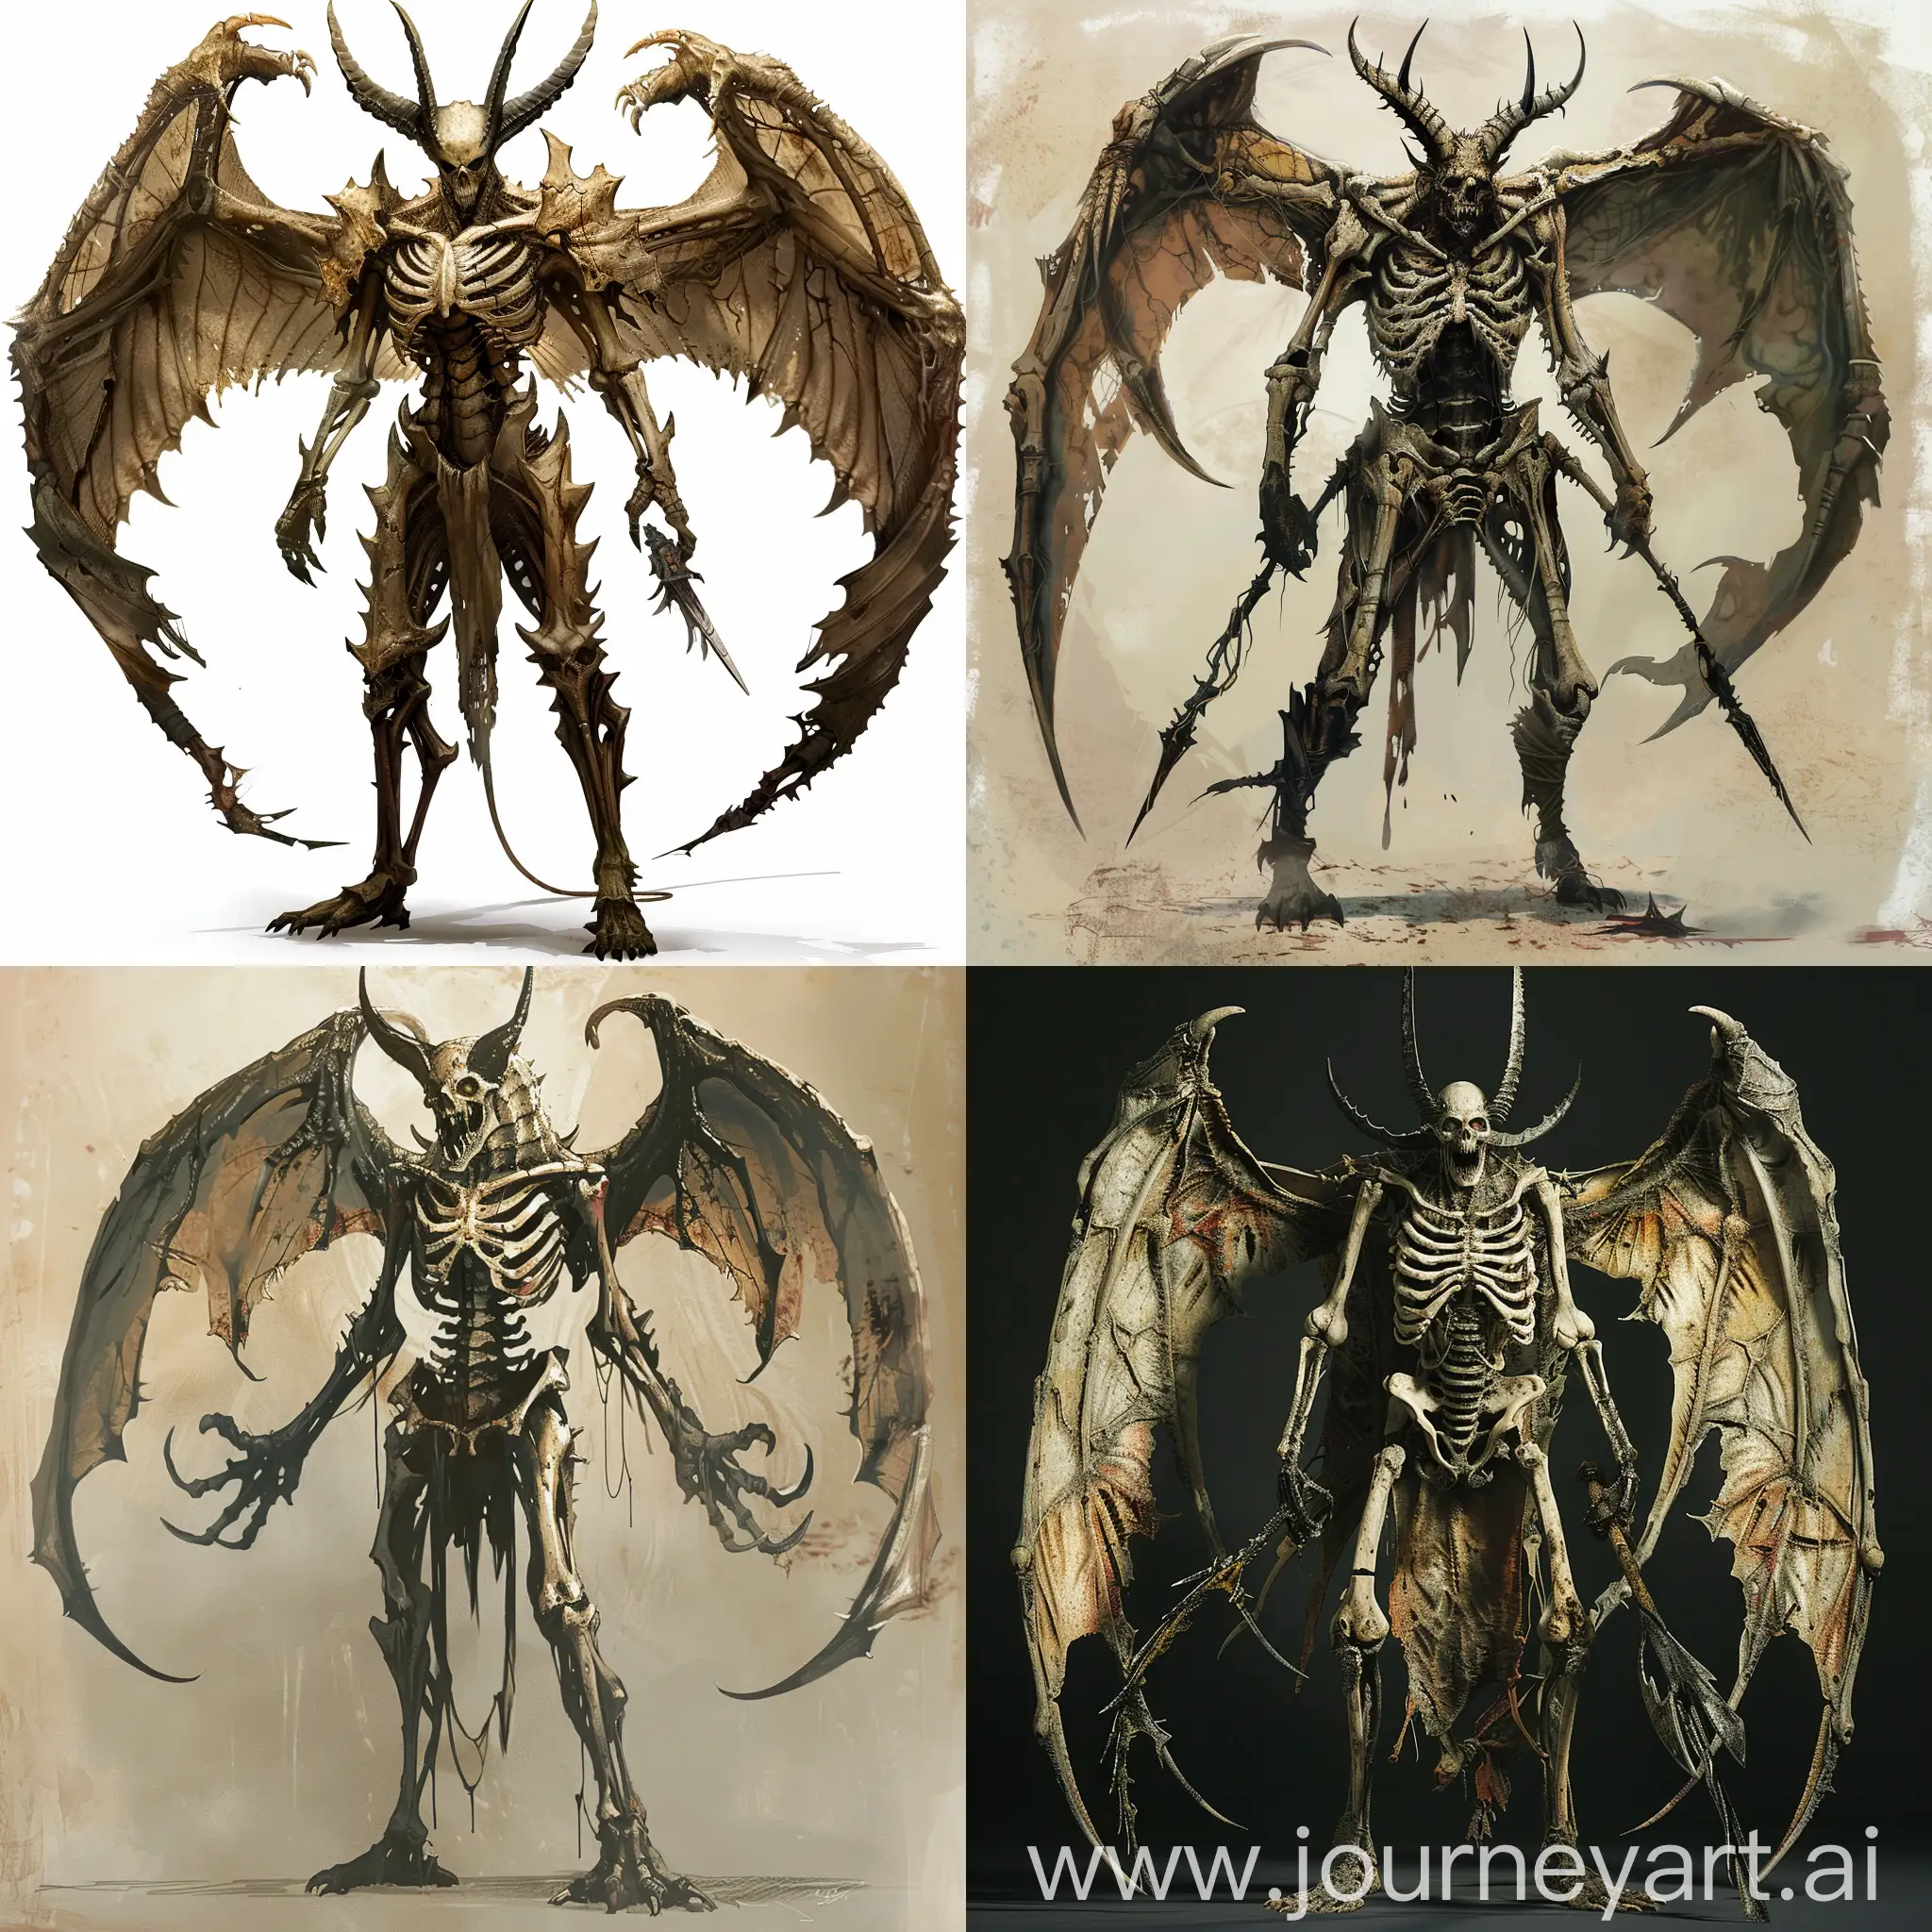 A demon of the abyss, Tall and agile, with massive wings and bone growths all over his body, resembling plate armor. The head is decorated with three straight horns. The missing lips reveal a row of sharp black teeth. Armed with a glaive.